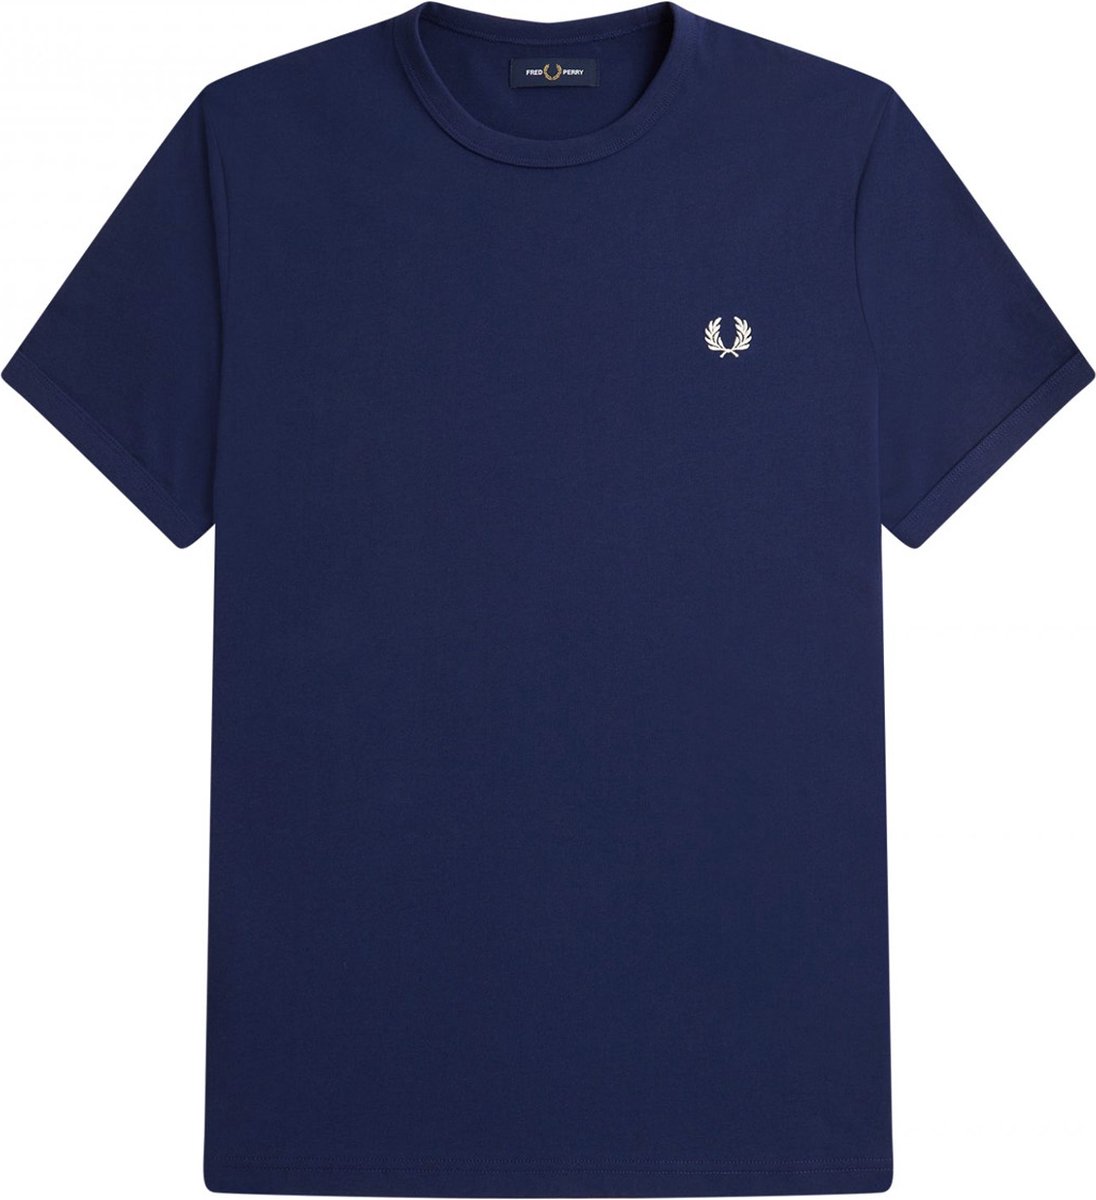 Fred Perry - Ringer T-Shirt - Donkerblauw T-Shirt-S